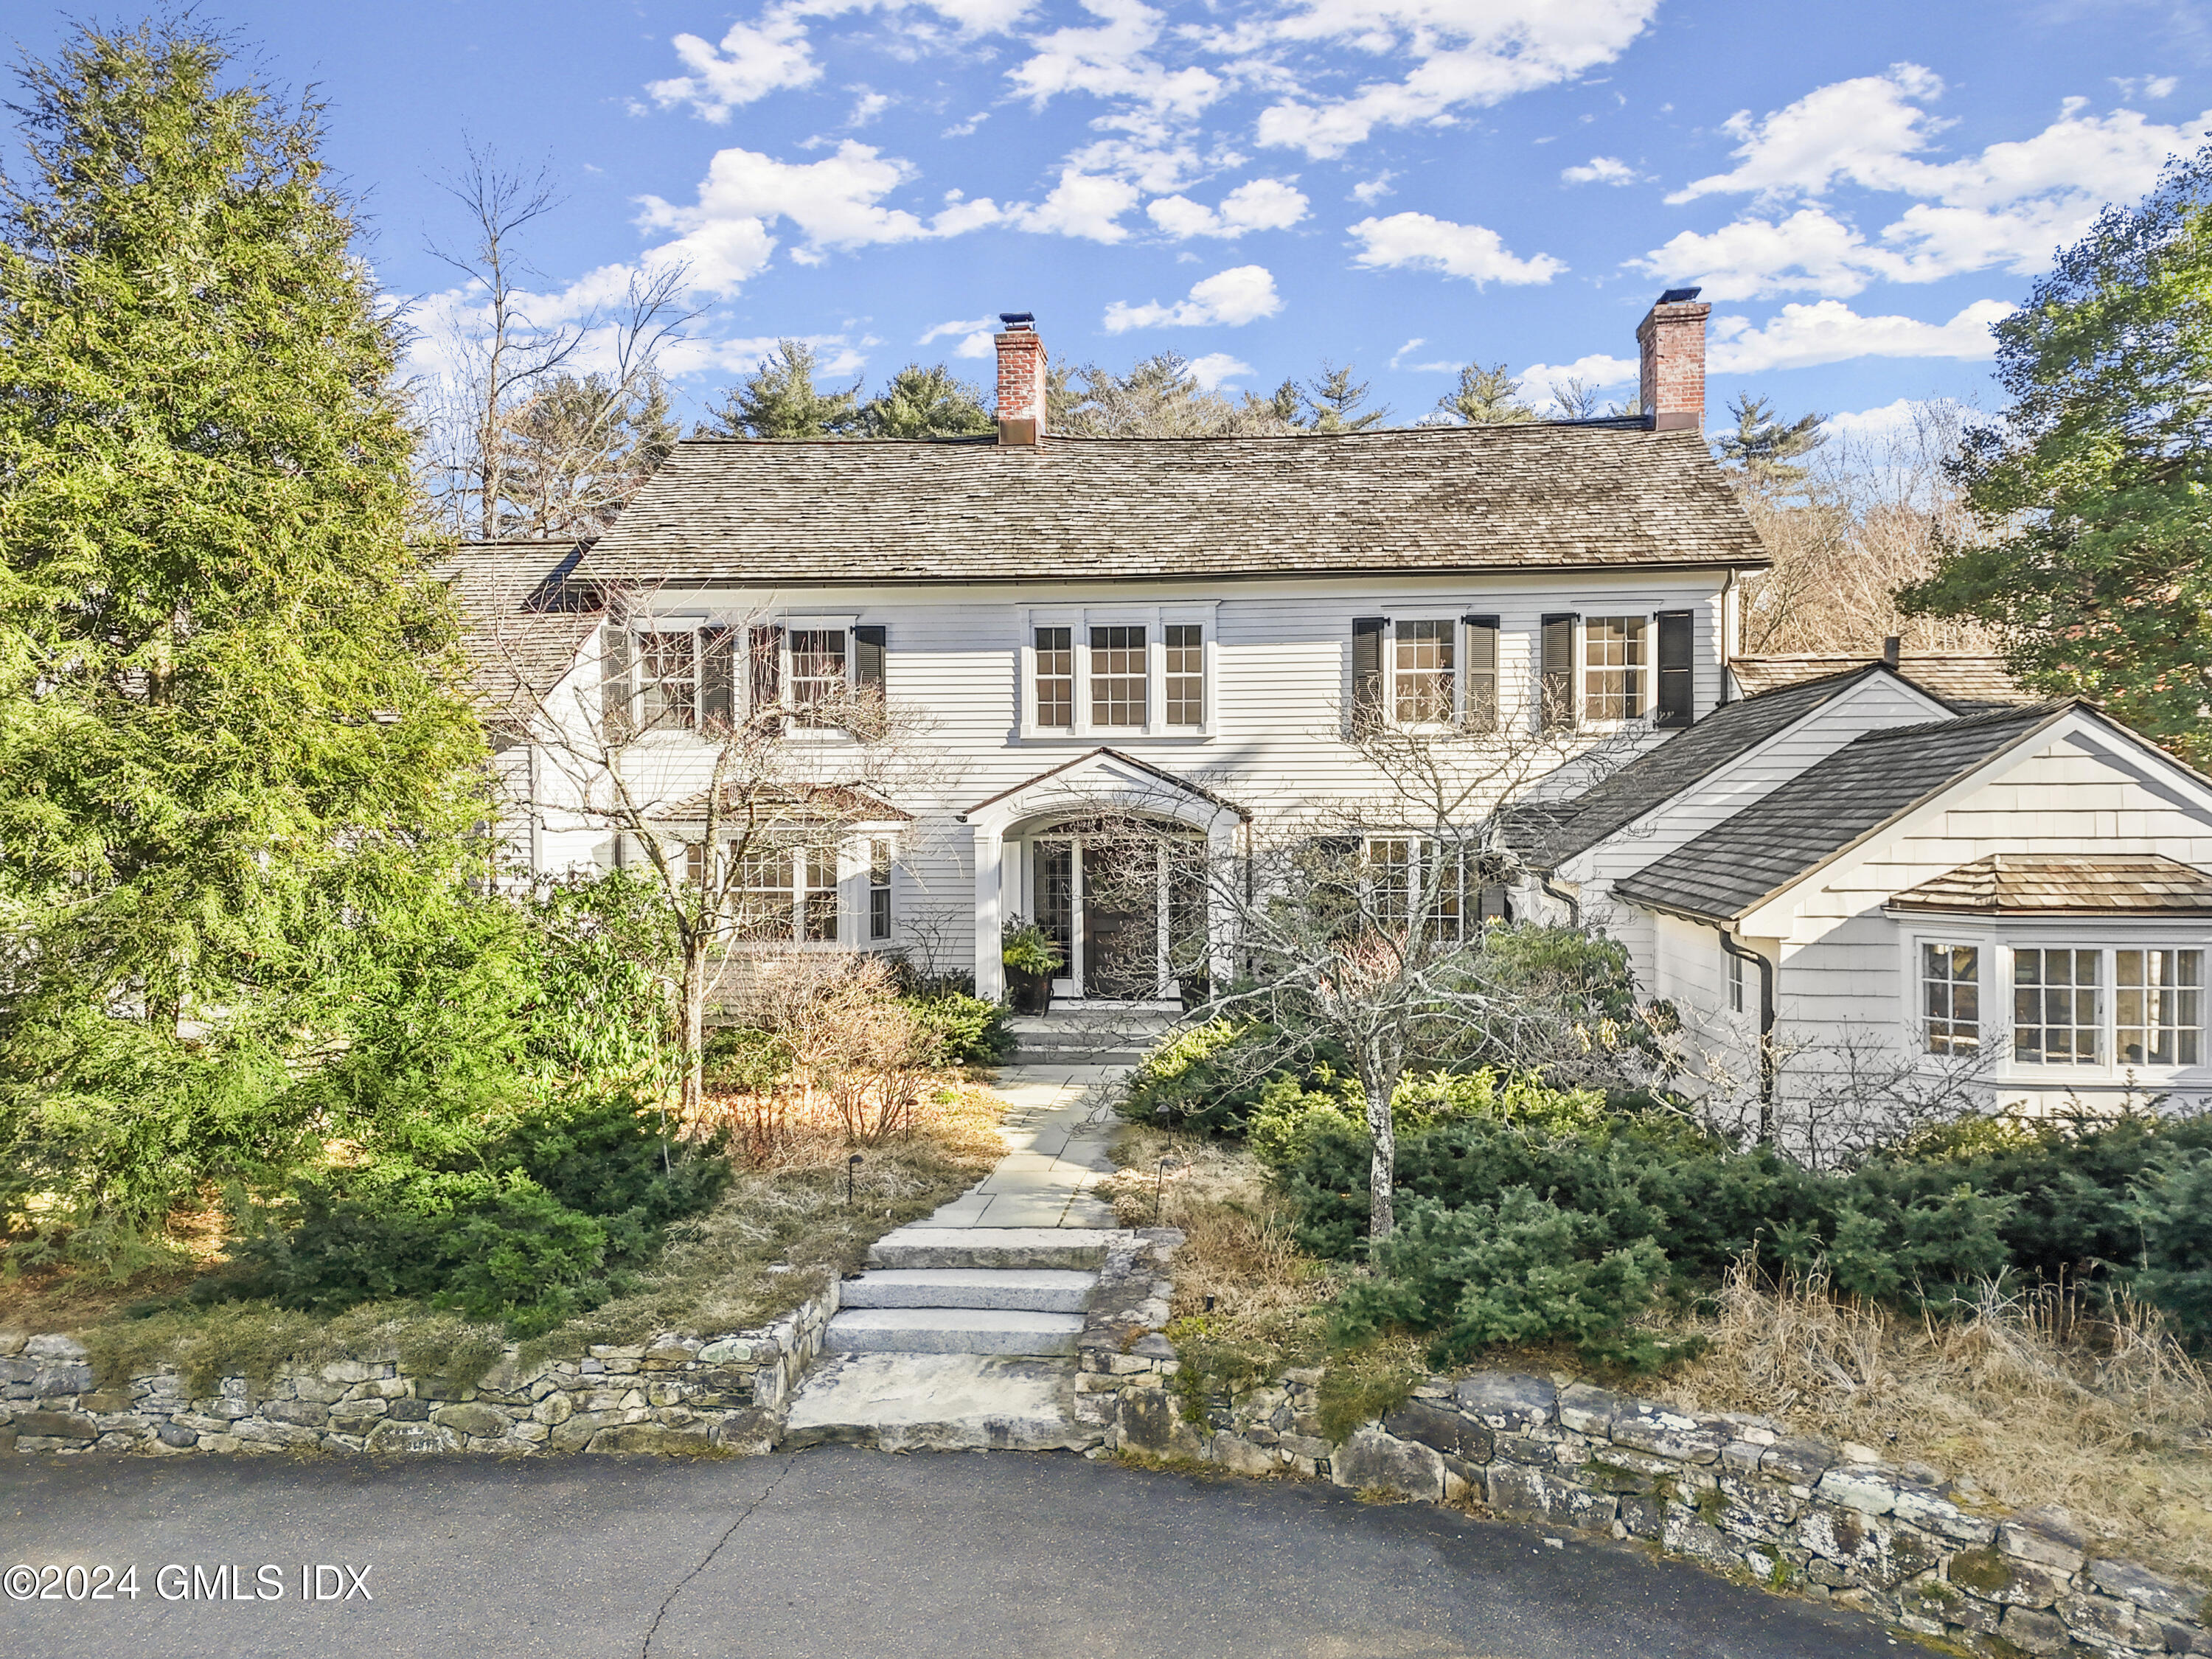 101103 Old Mill Road, Greenwich, Connecticut - 7 Bedrooms  7.5 Bathrooms - 